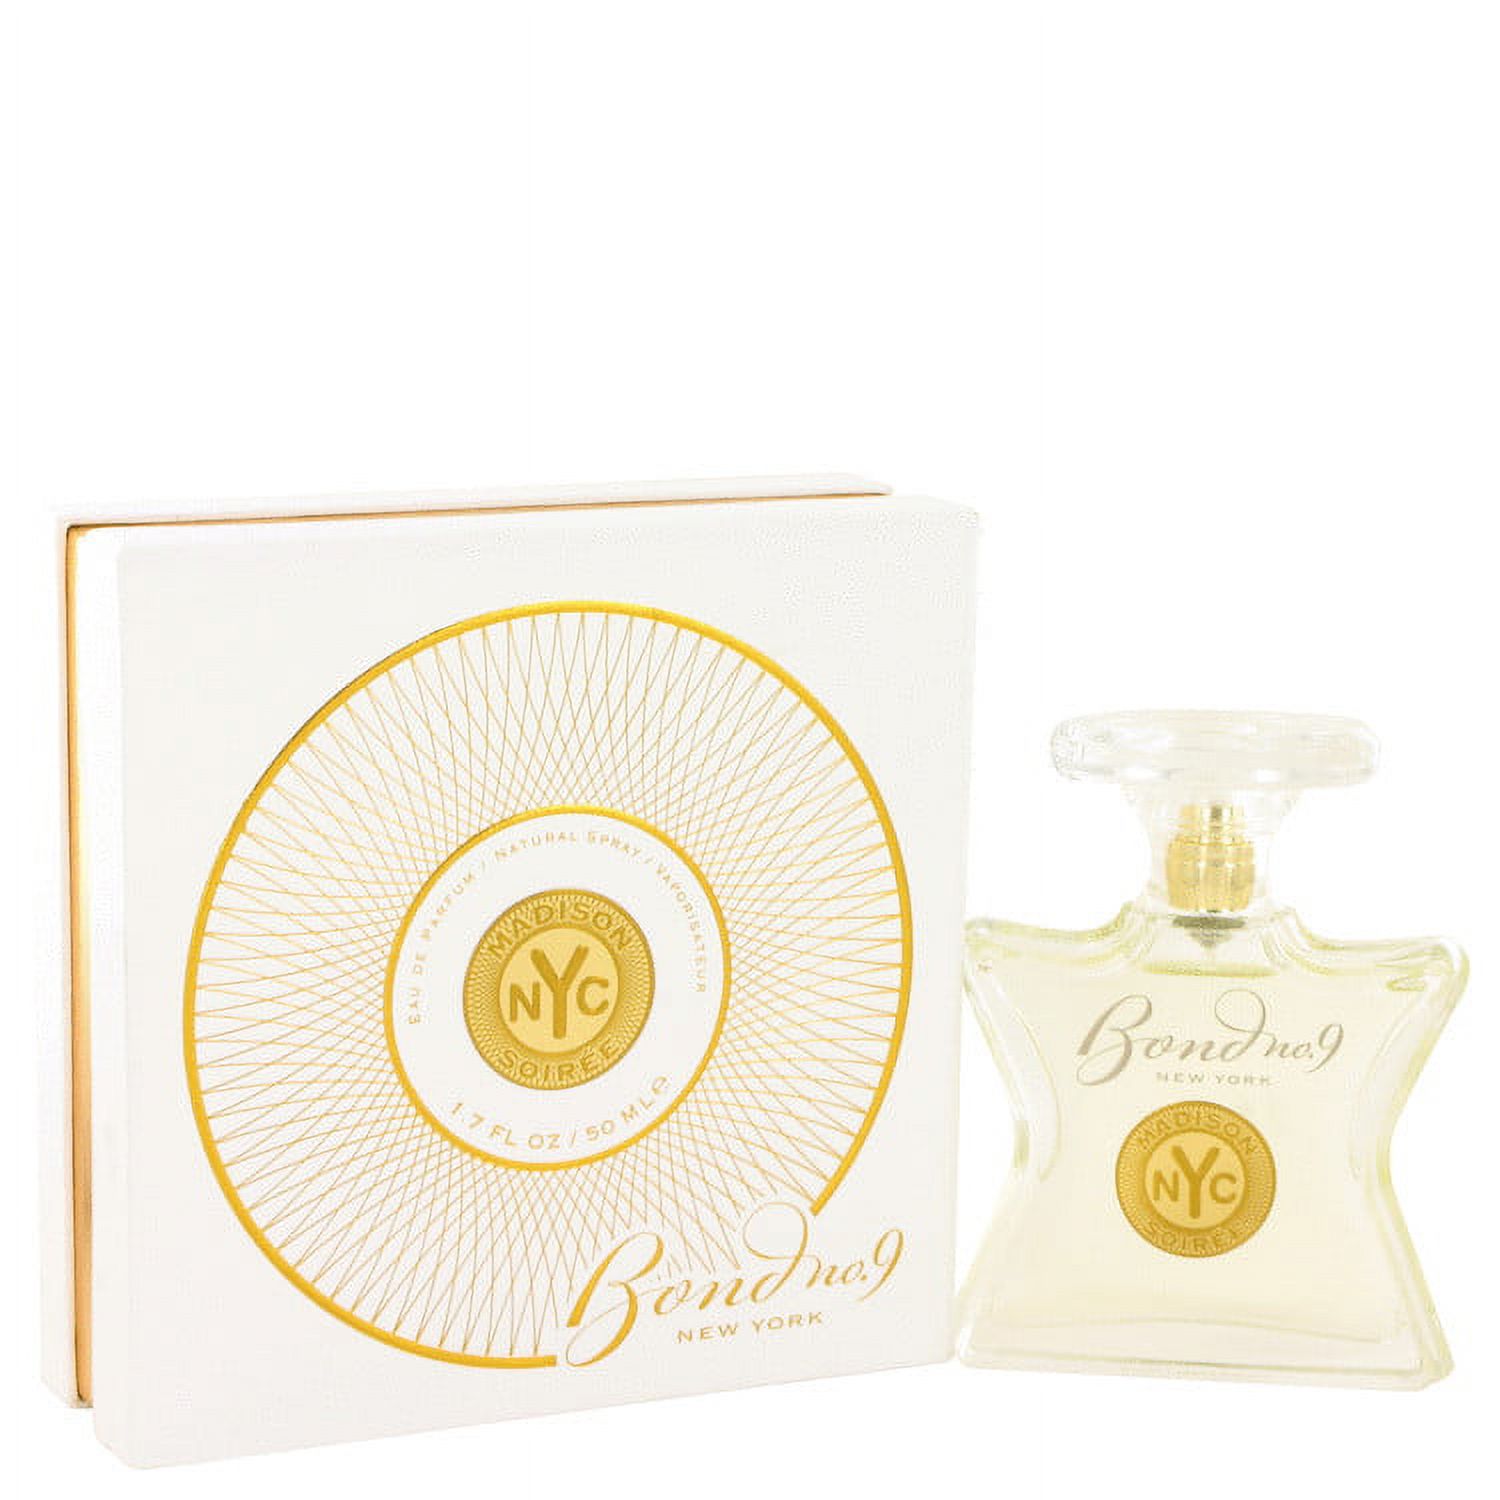 Madison Soiree by Bond No. 9 - image 1 of 1